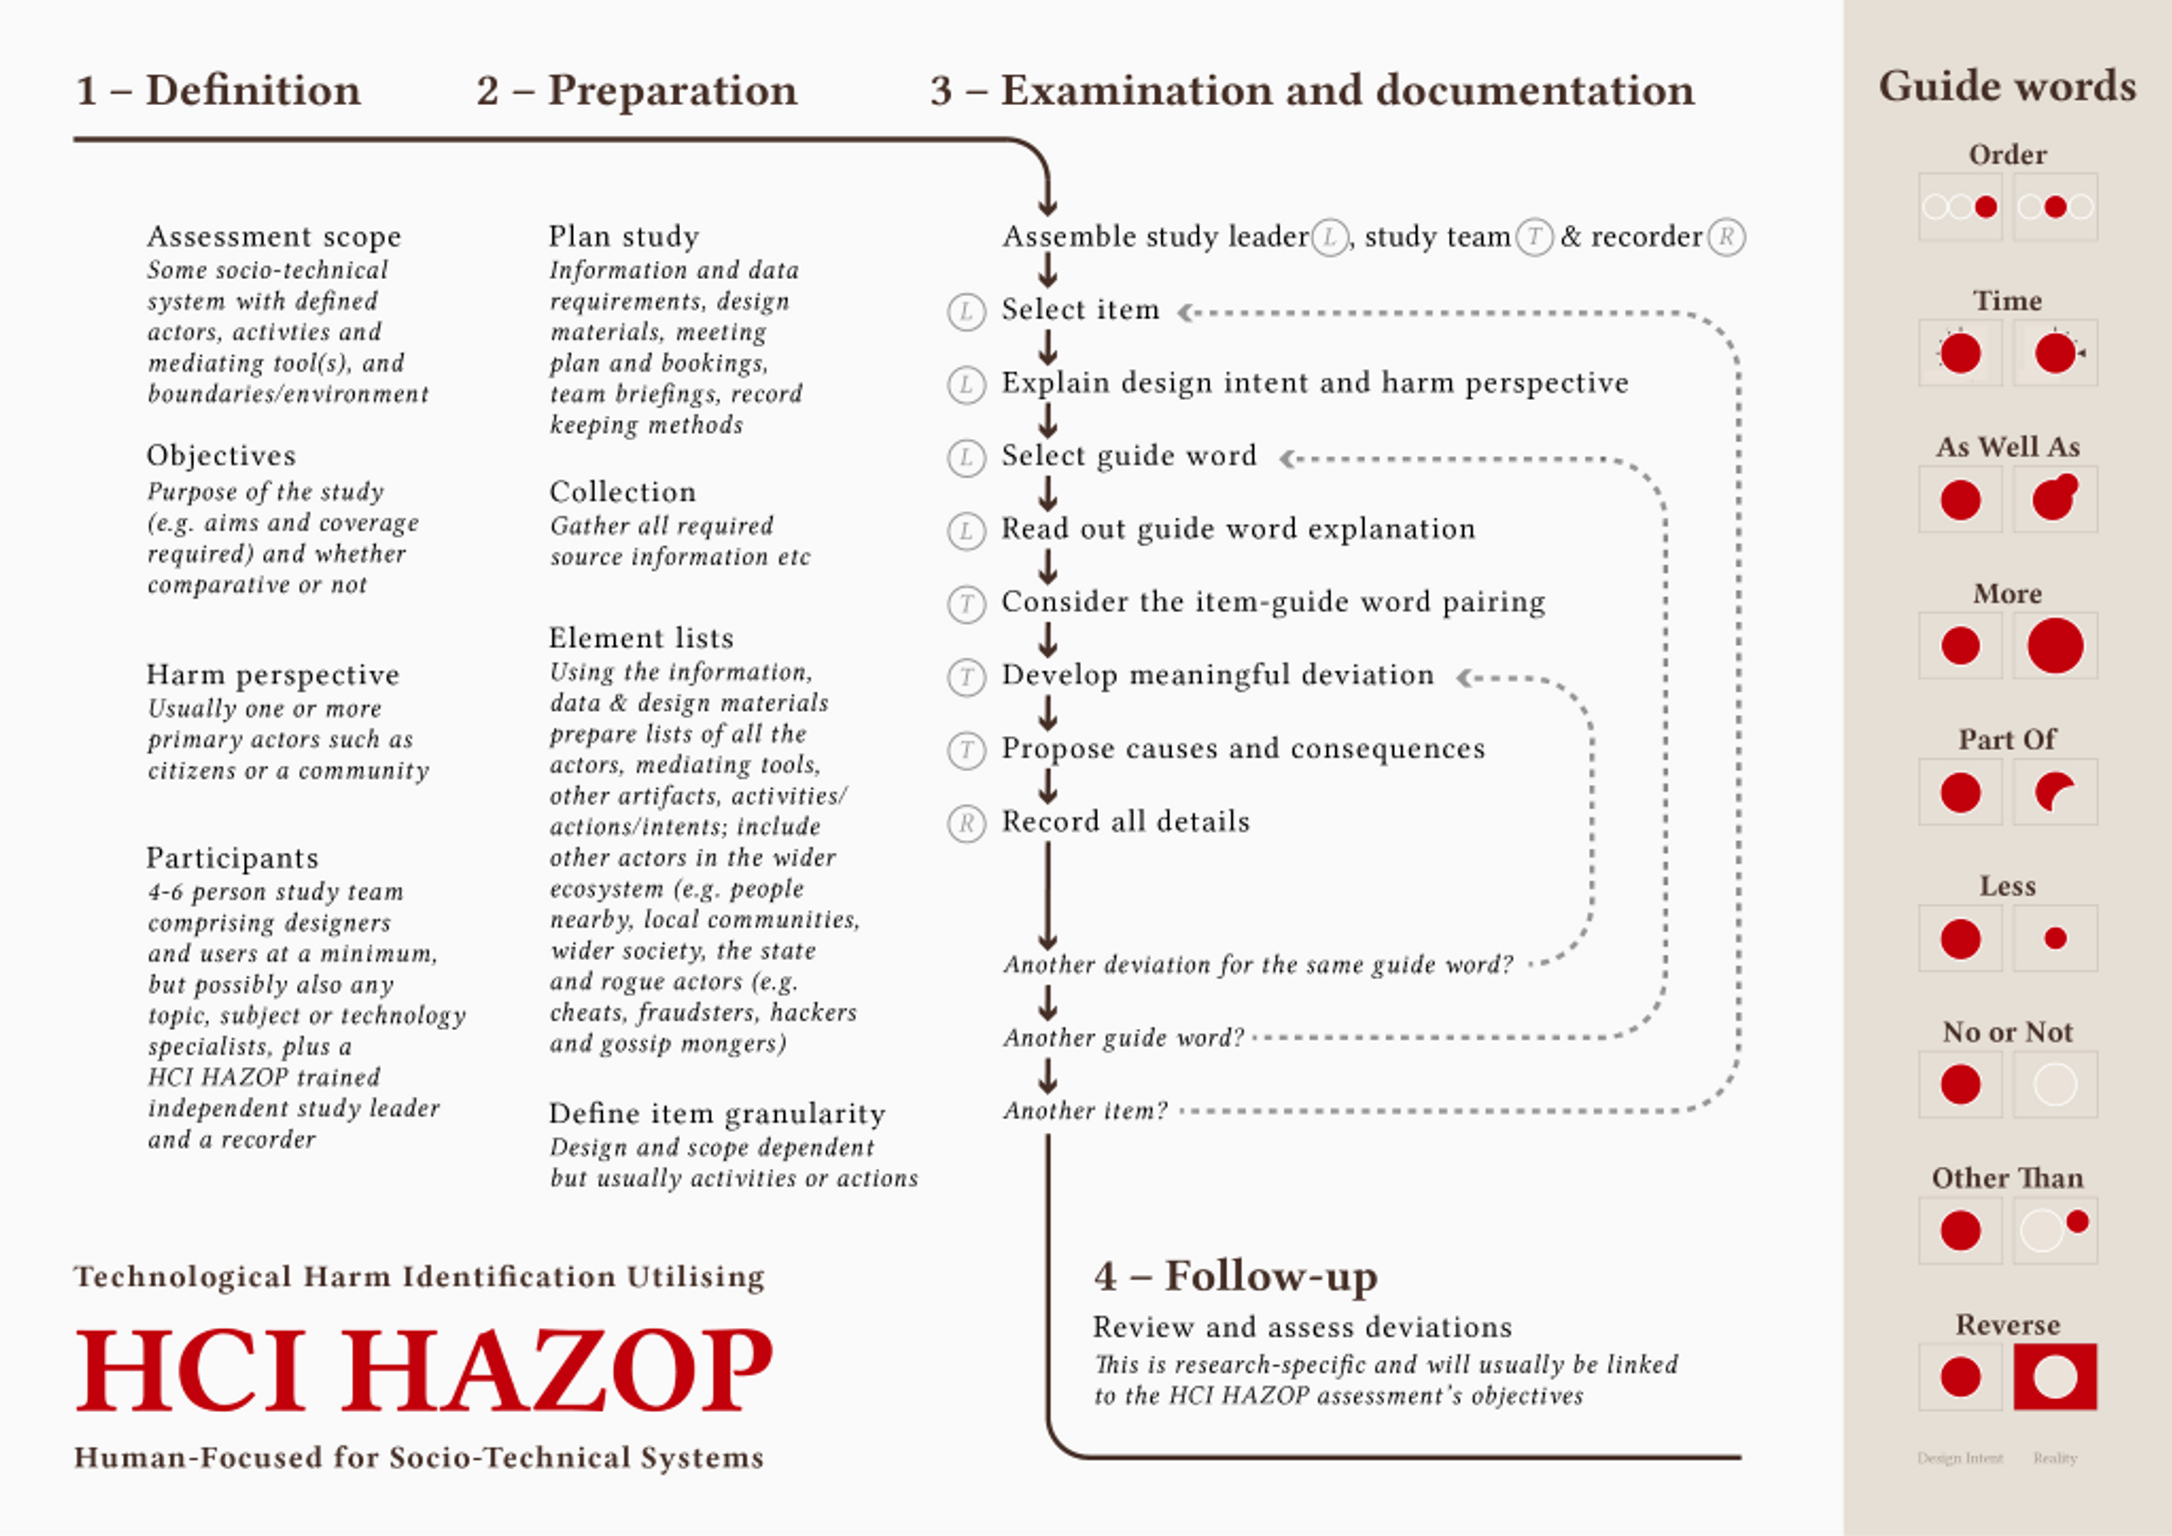  HCI HAZOP demonstrates the method’s promise for identify human-centric undesirable consequences.